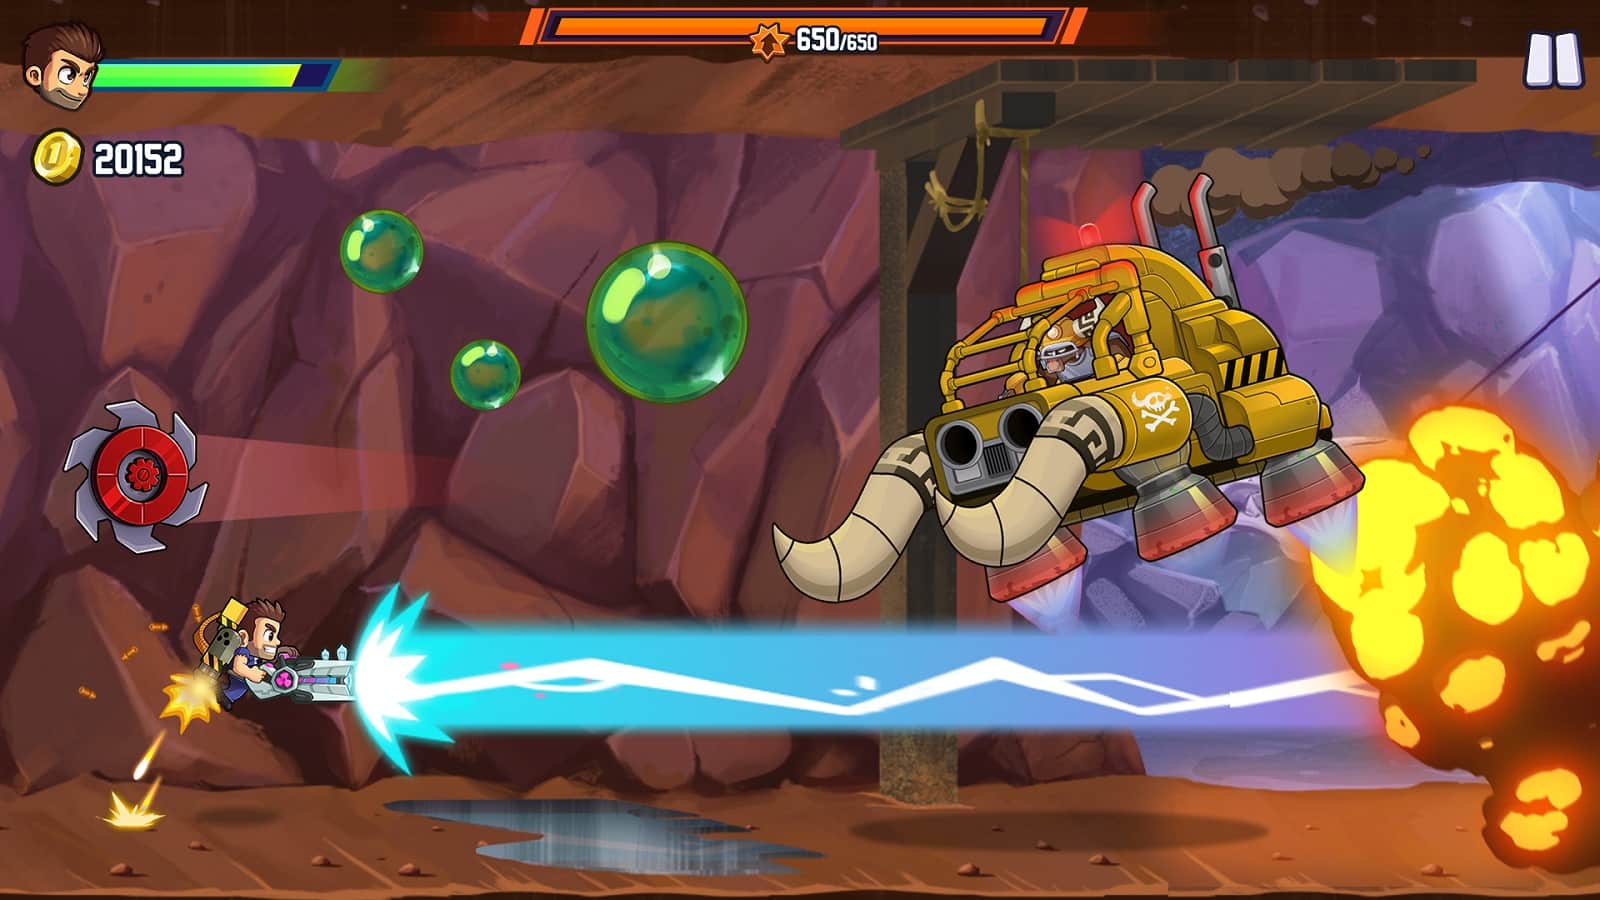 in-game screenshot from jetpack joyride 2 featuring a boss